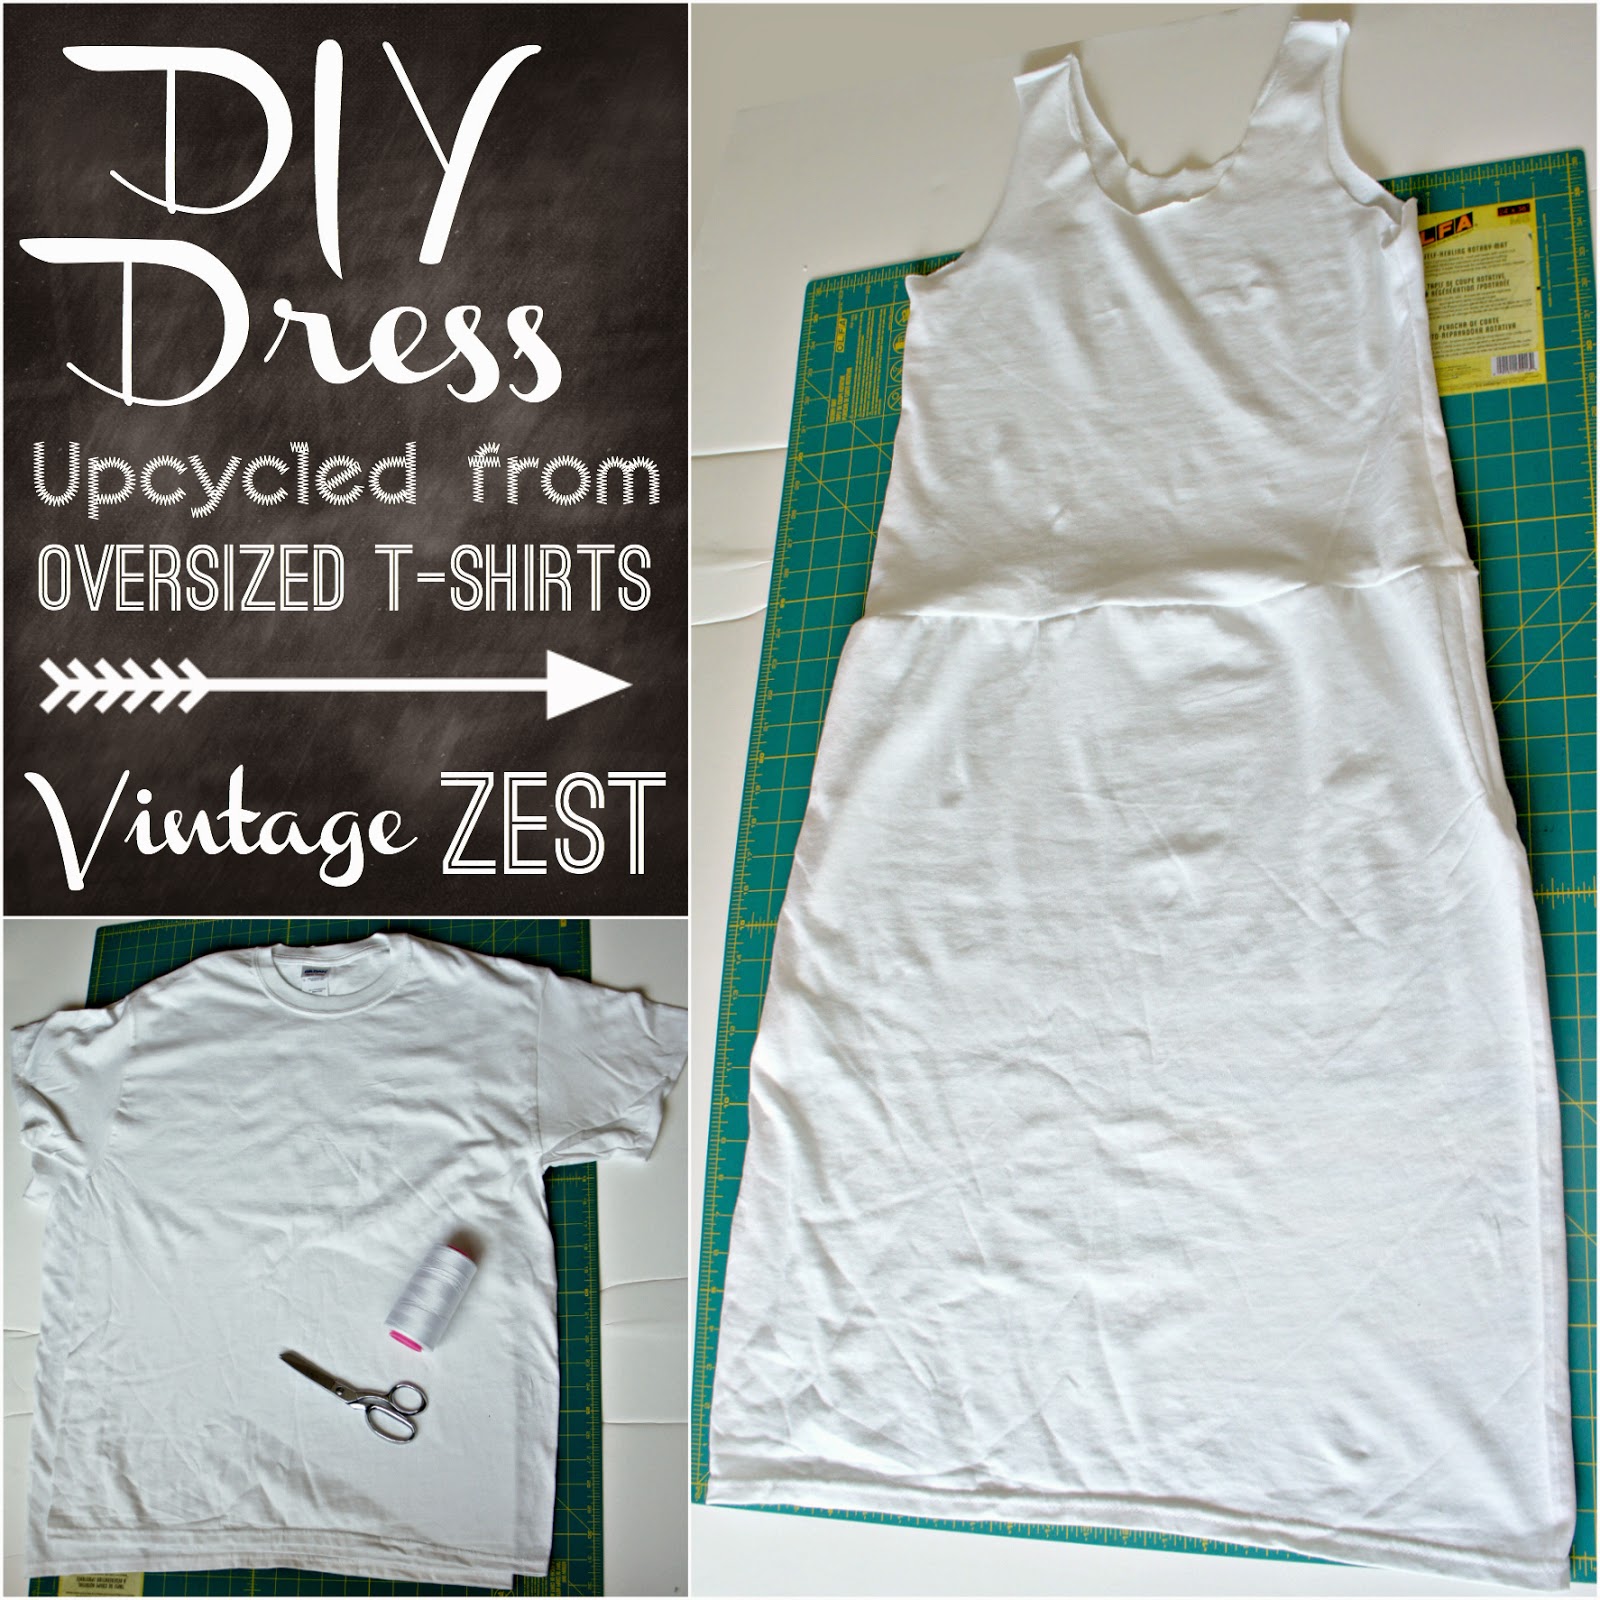 How to: DIY a Dress Upcycled from Oversized T-shirts on Diane's Vintage Zest!  #sewing #tutorial